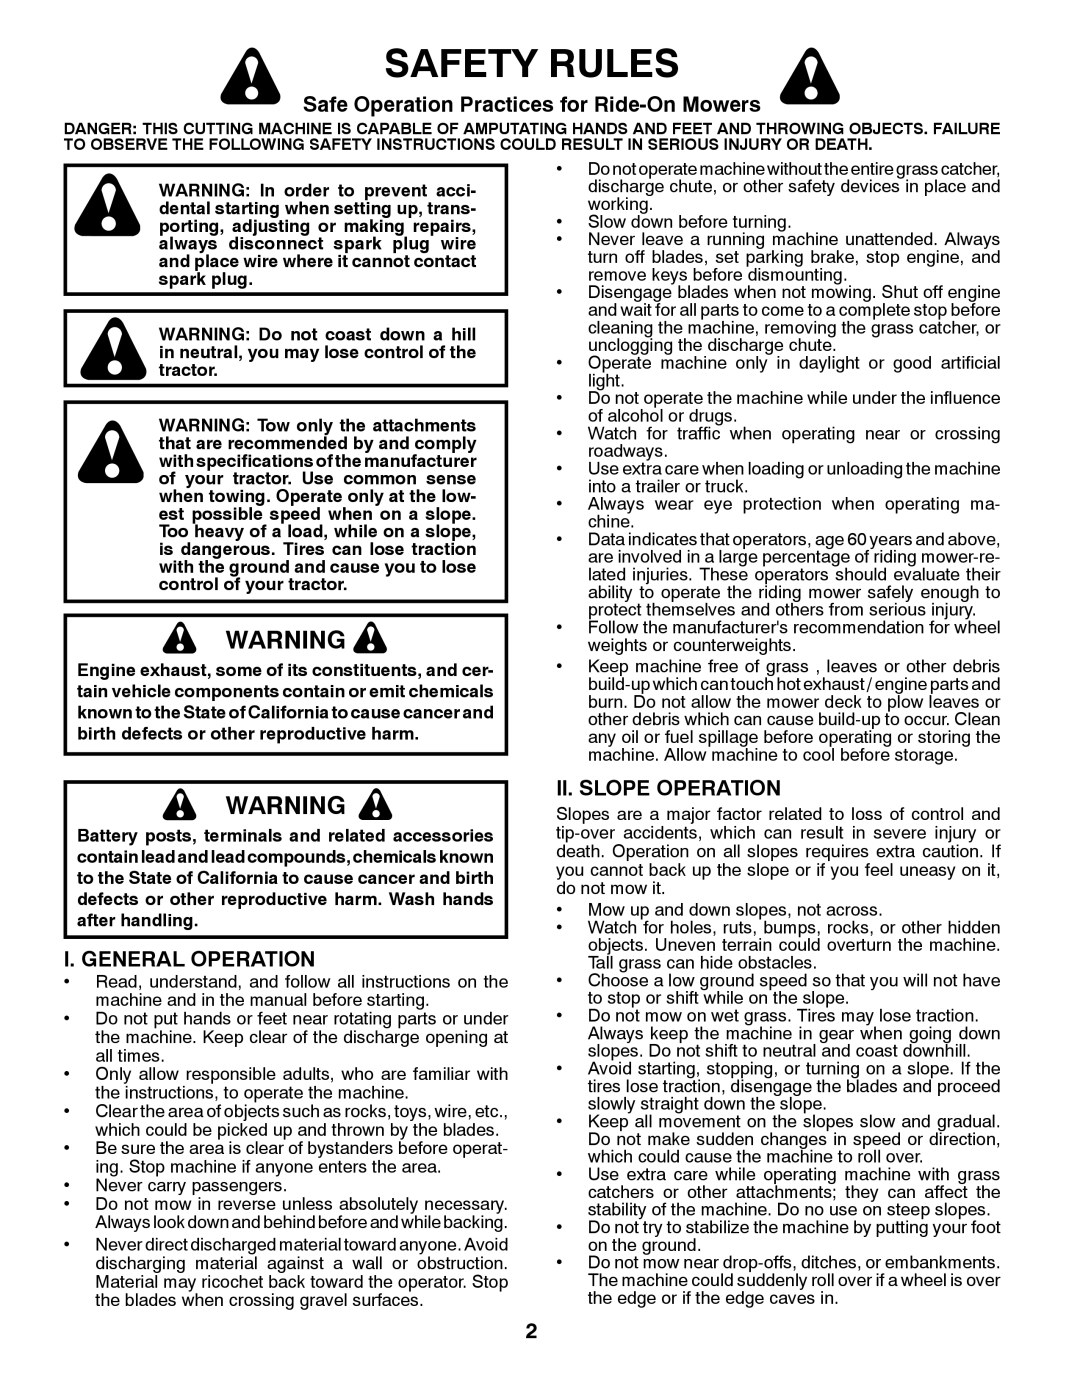 Husqvarna 917.28961 Safety Rules, Safe Operation Practices for Ride-On Mowers, General Operation, II. Slope Operation 